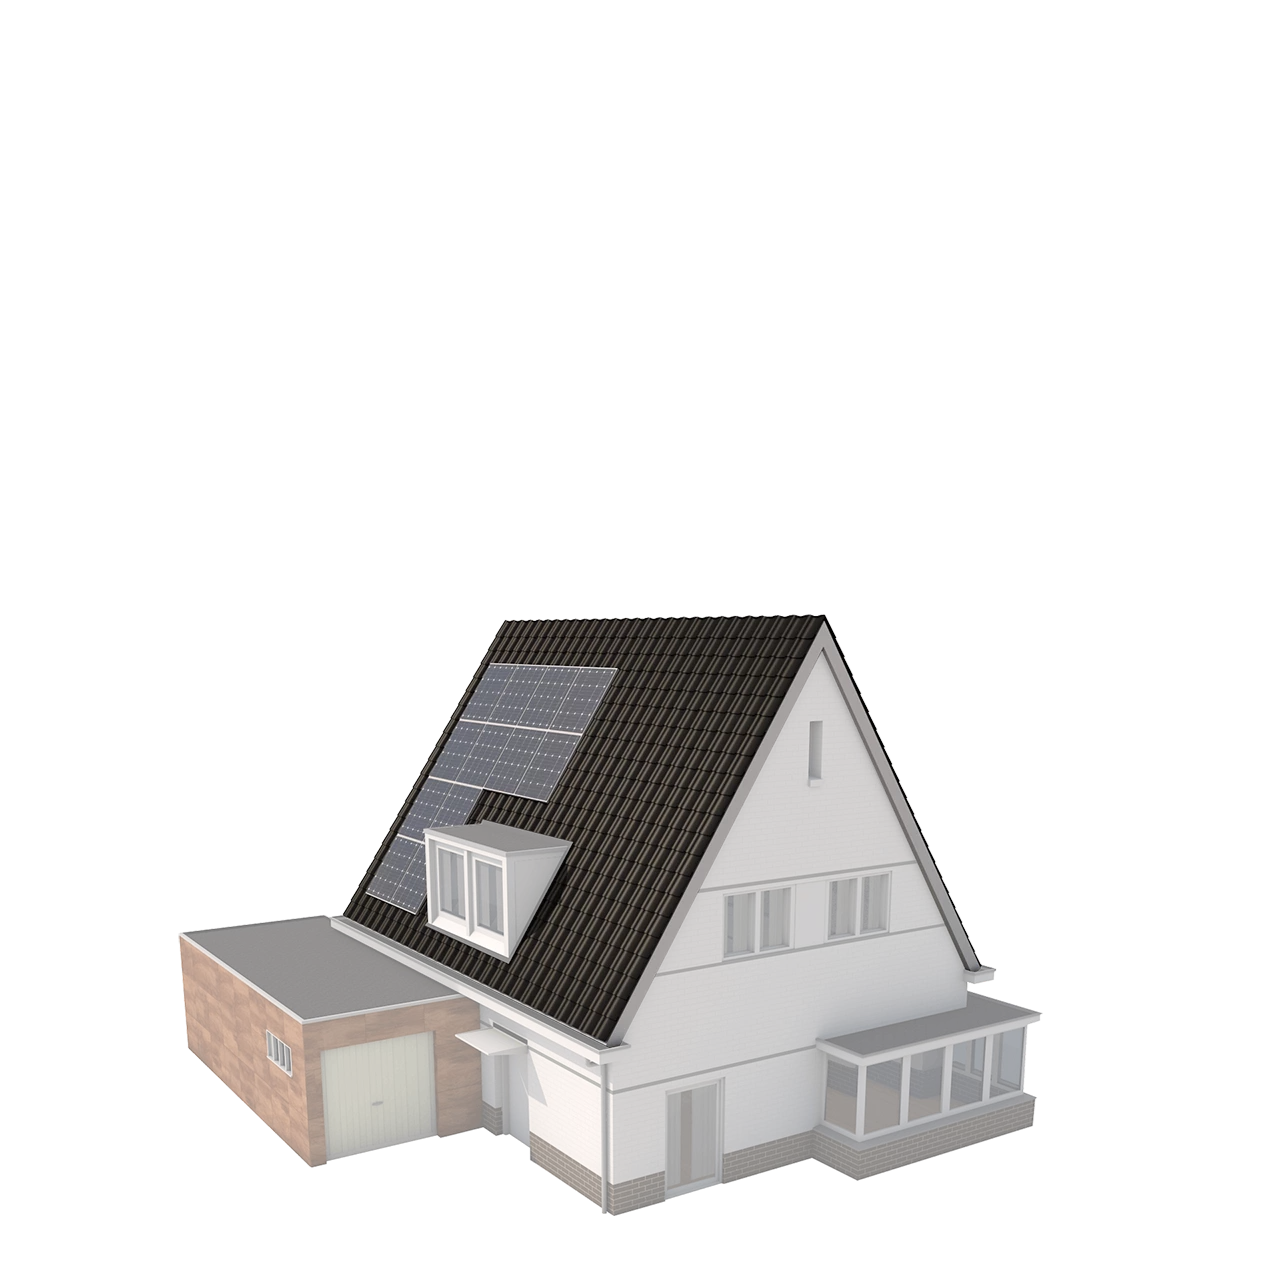 Pitched roof